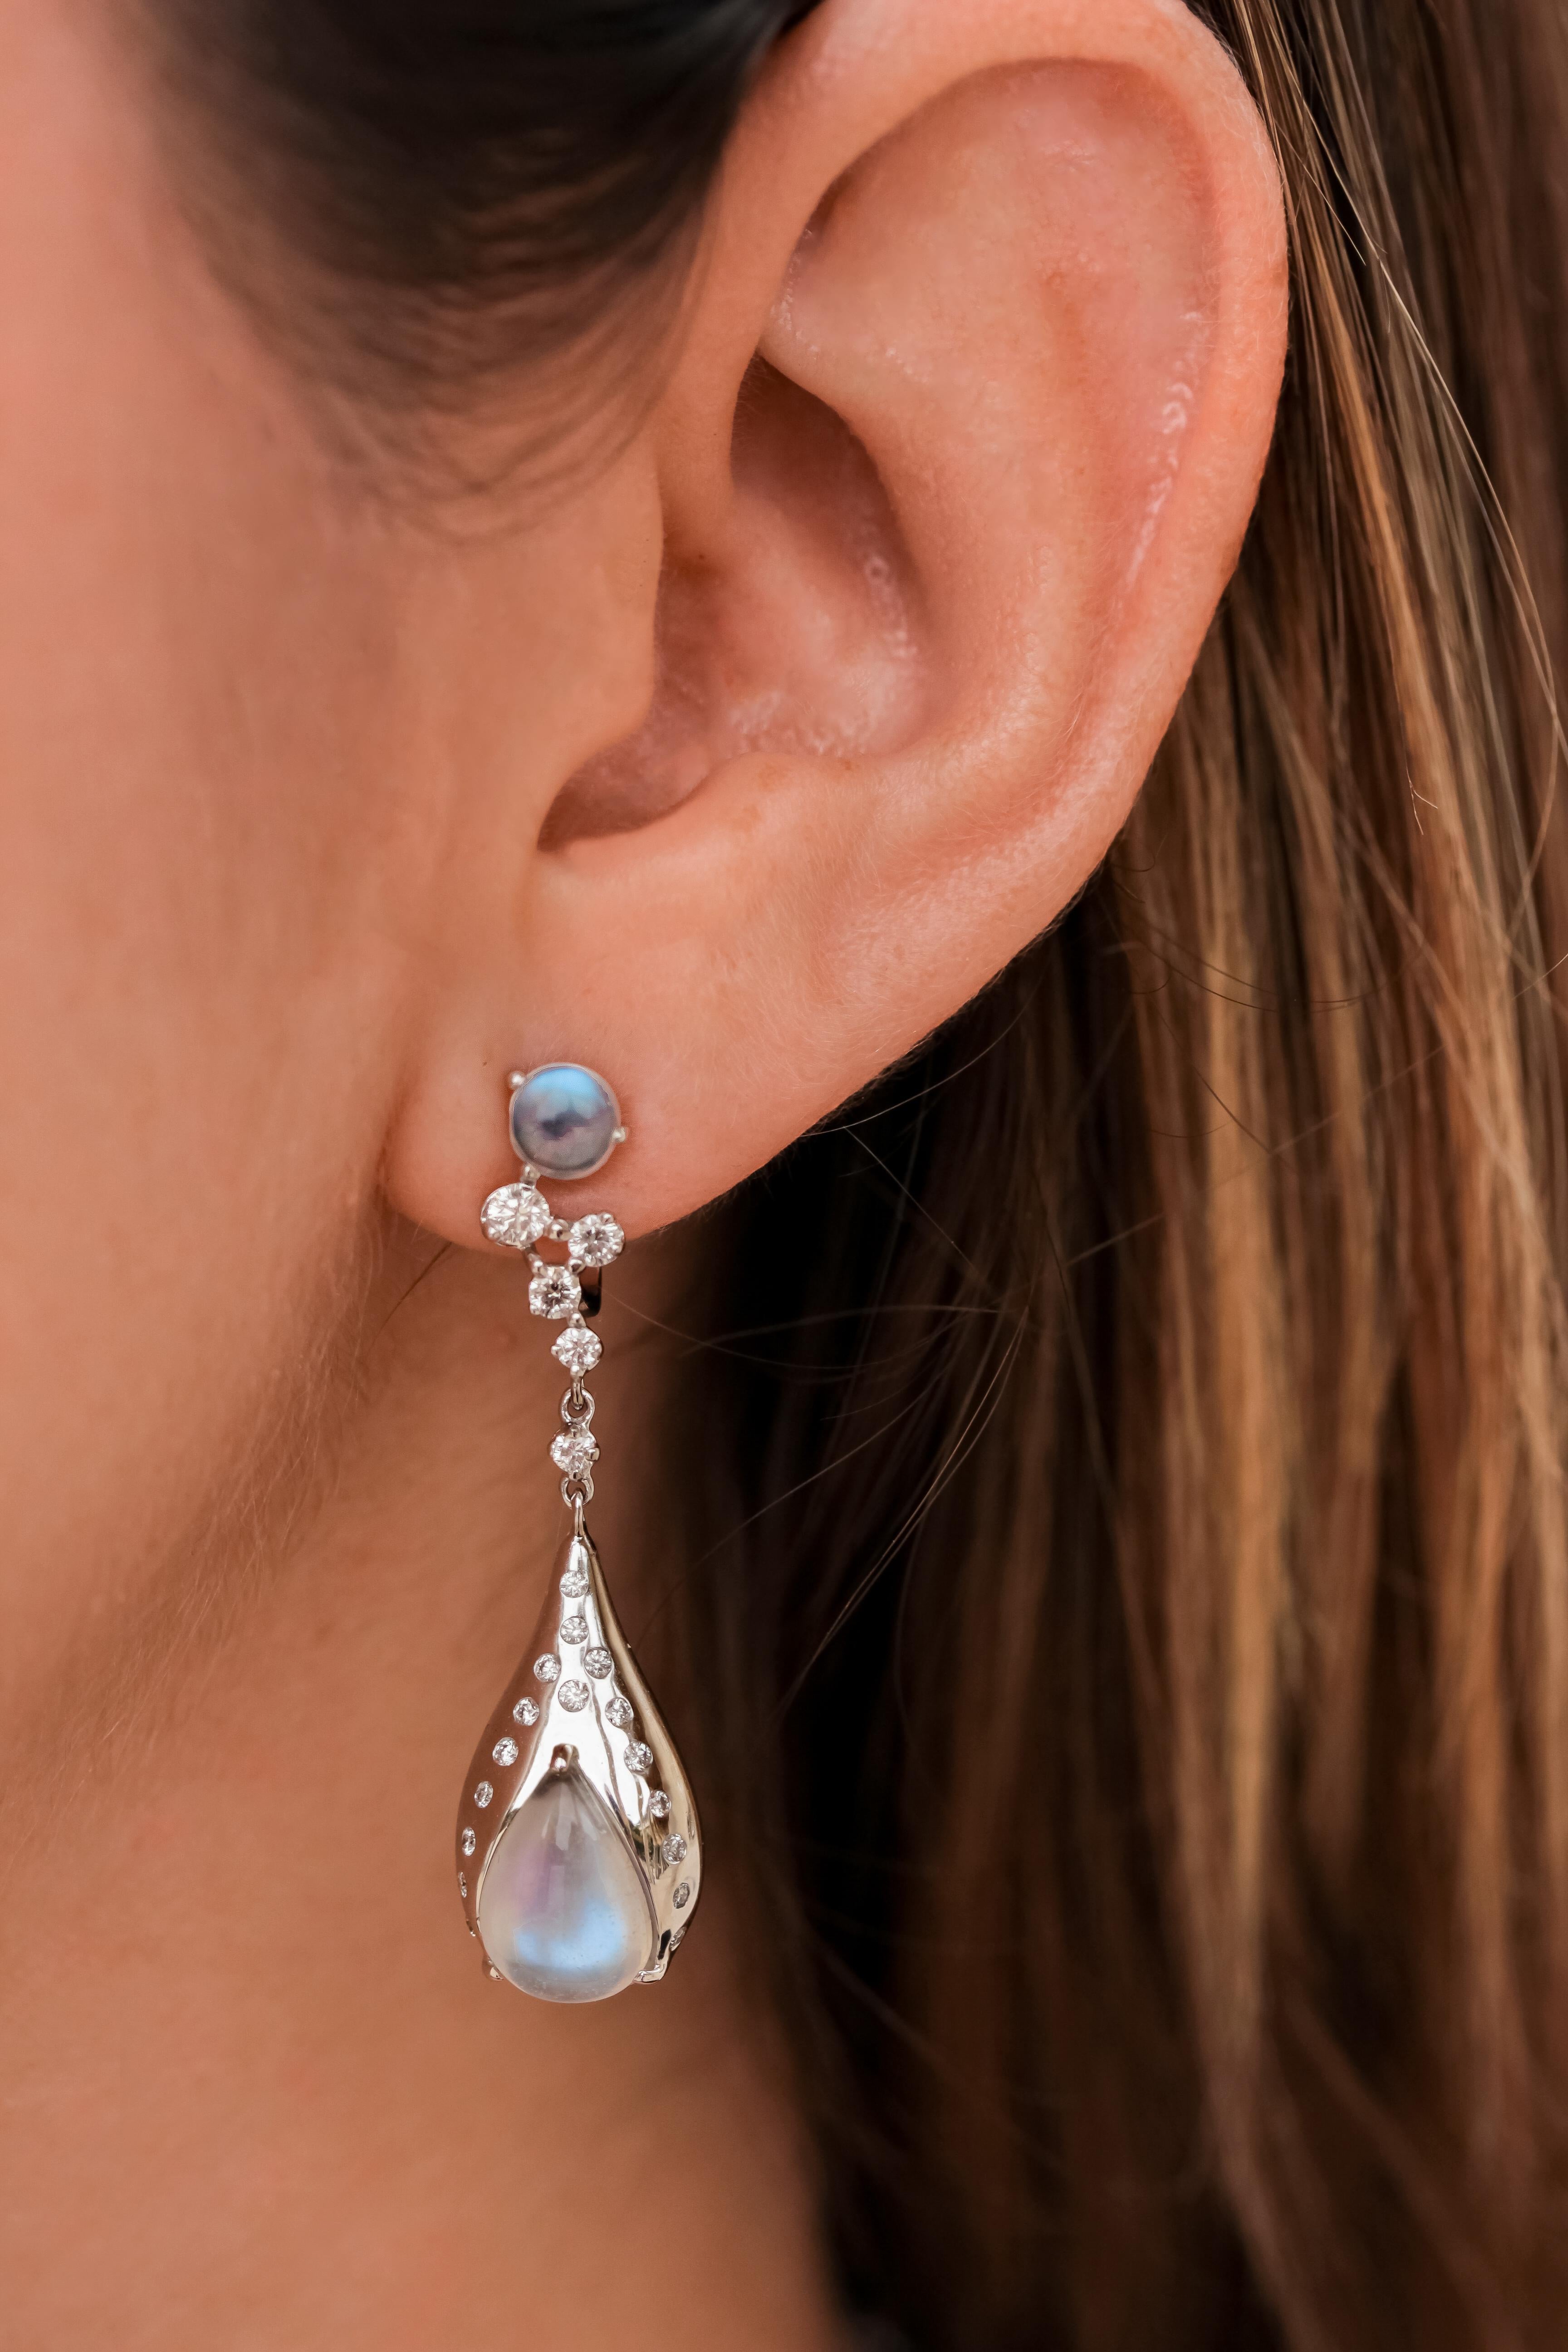 Circé Earrings by Mathon Paris at Second Petale Gallery

Add a touch of elegance to your style with Circé earrings associating white gold, diamonds, and moonstones. 
 
 Delivered with post for pierced ears 
 Removable
 
About the Gemstones :
 32